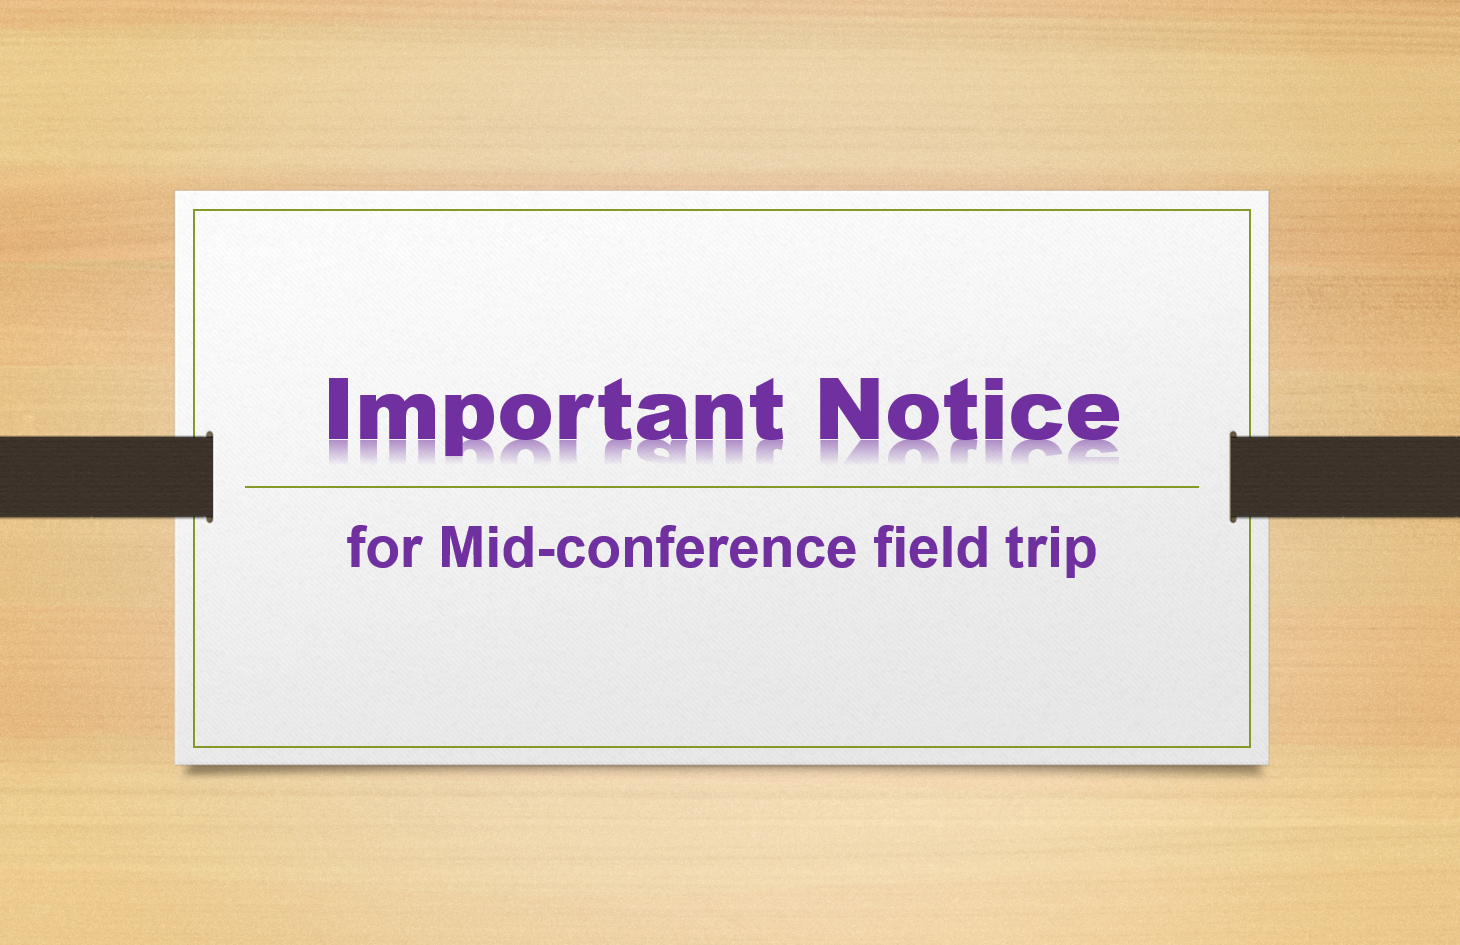 Important Notice for Mid-conference field trip